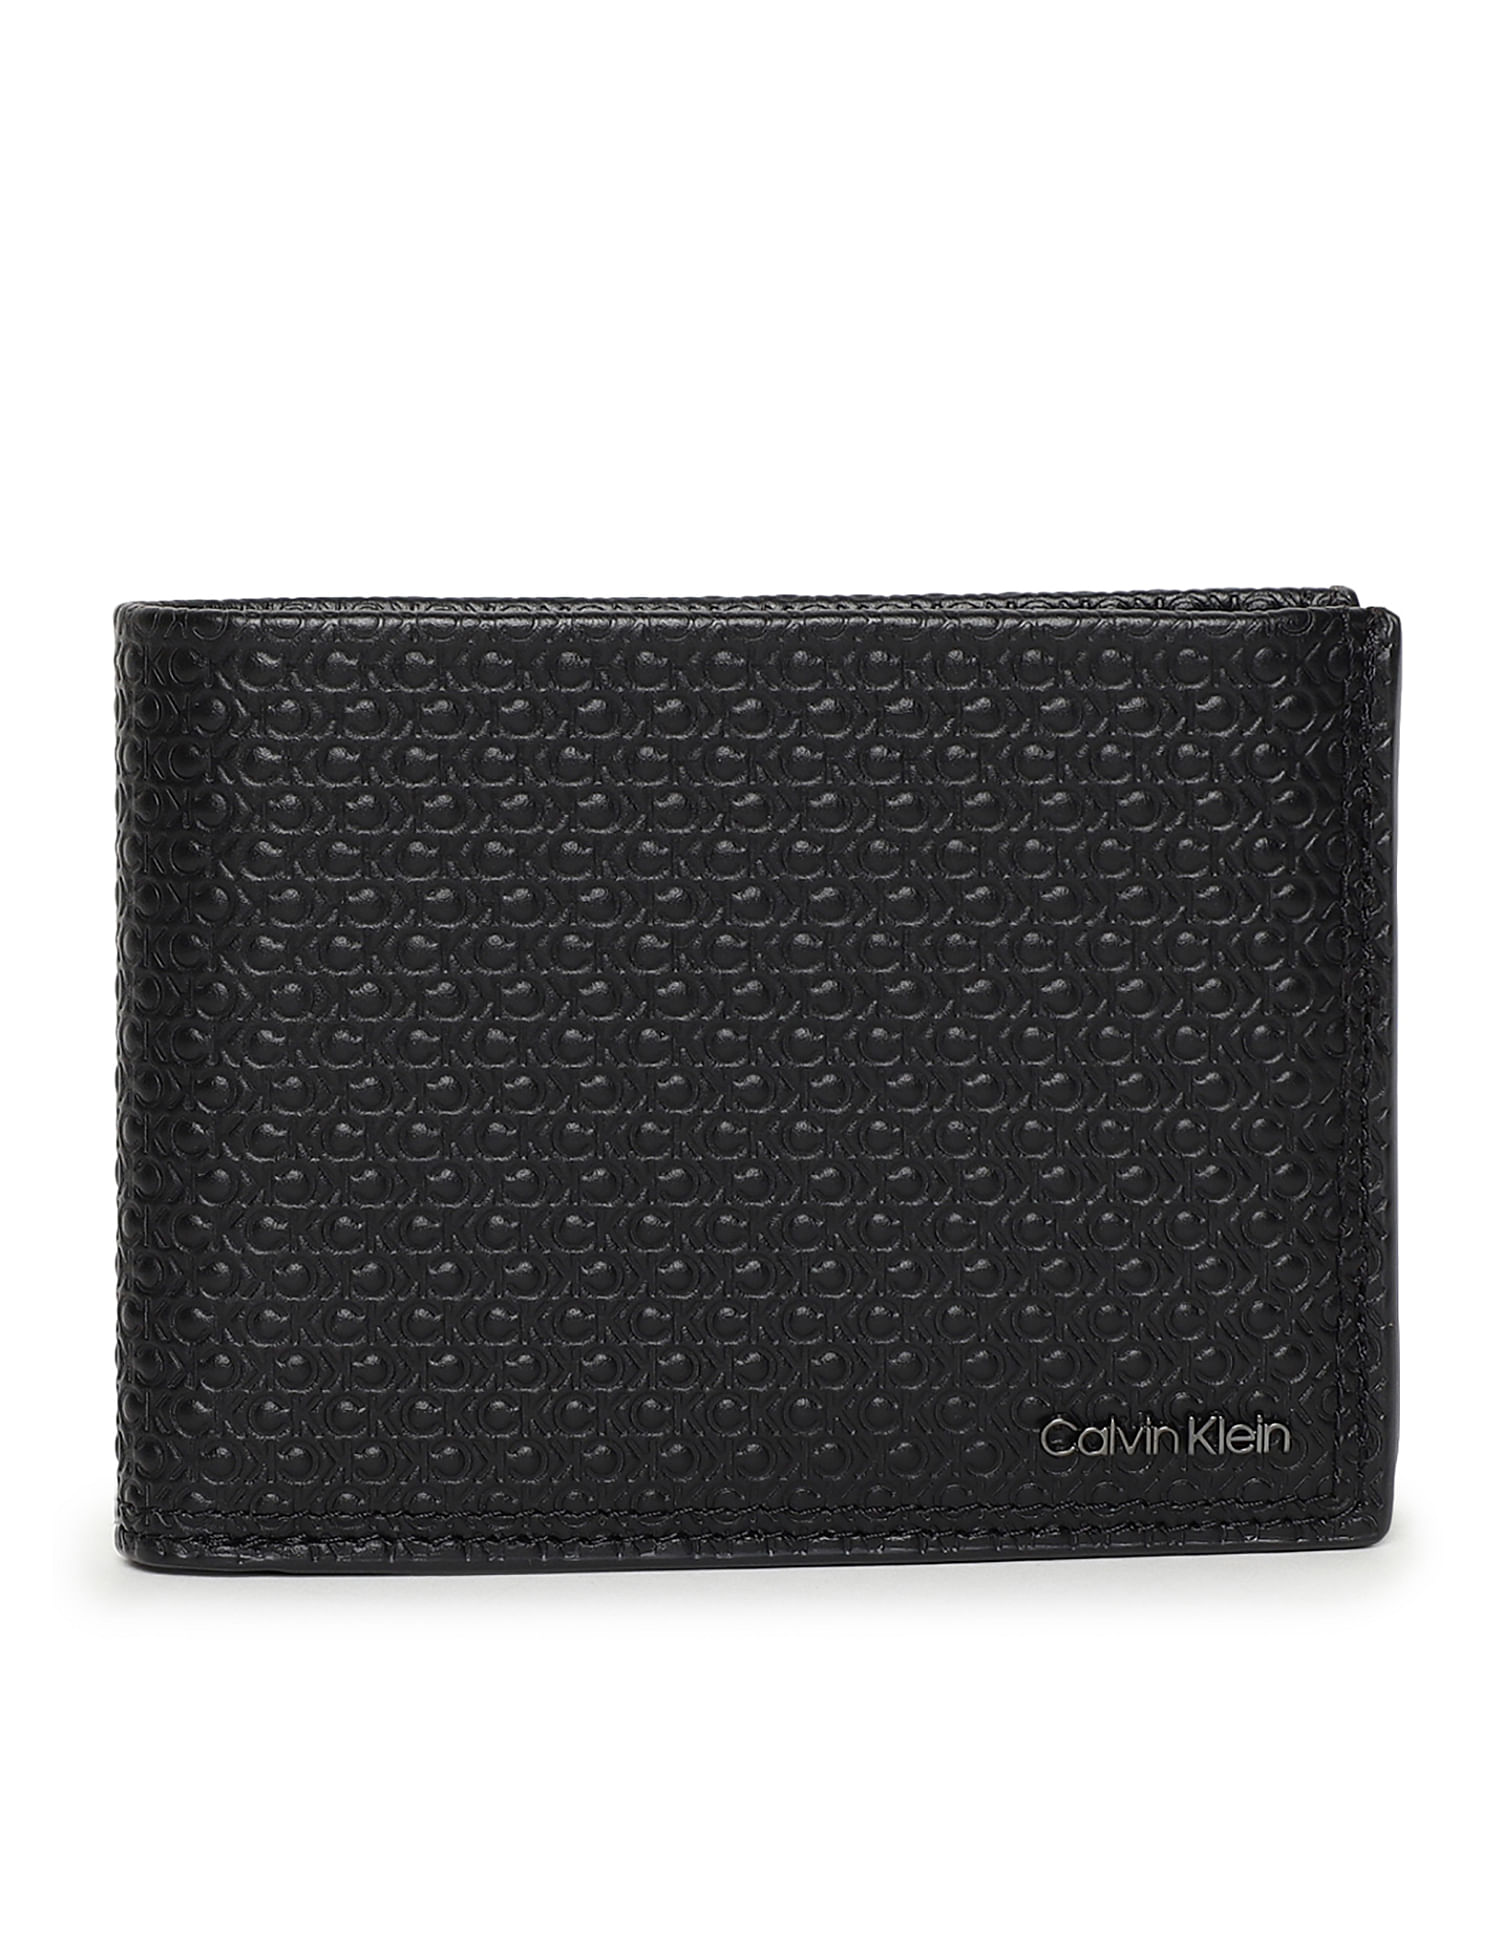 Calvin Klein Purses & Wallets | Card Holders | House Of Fraser